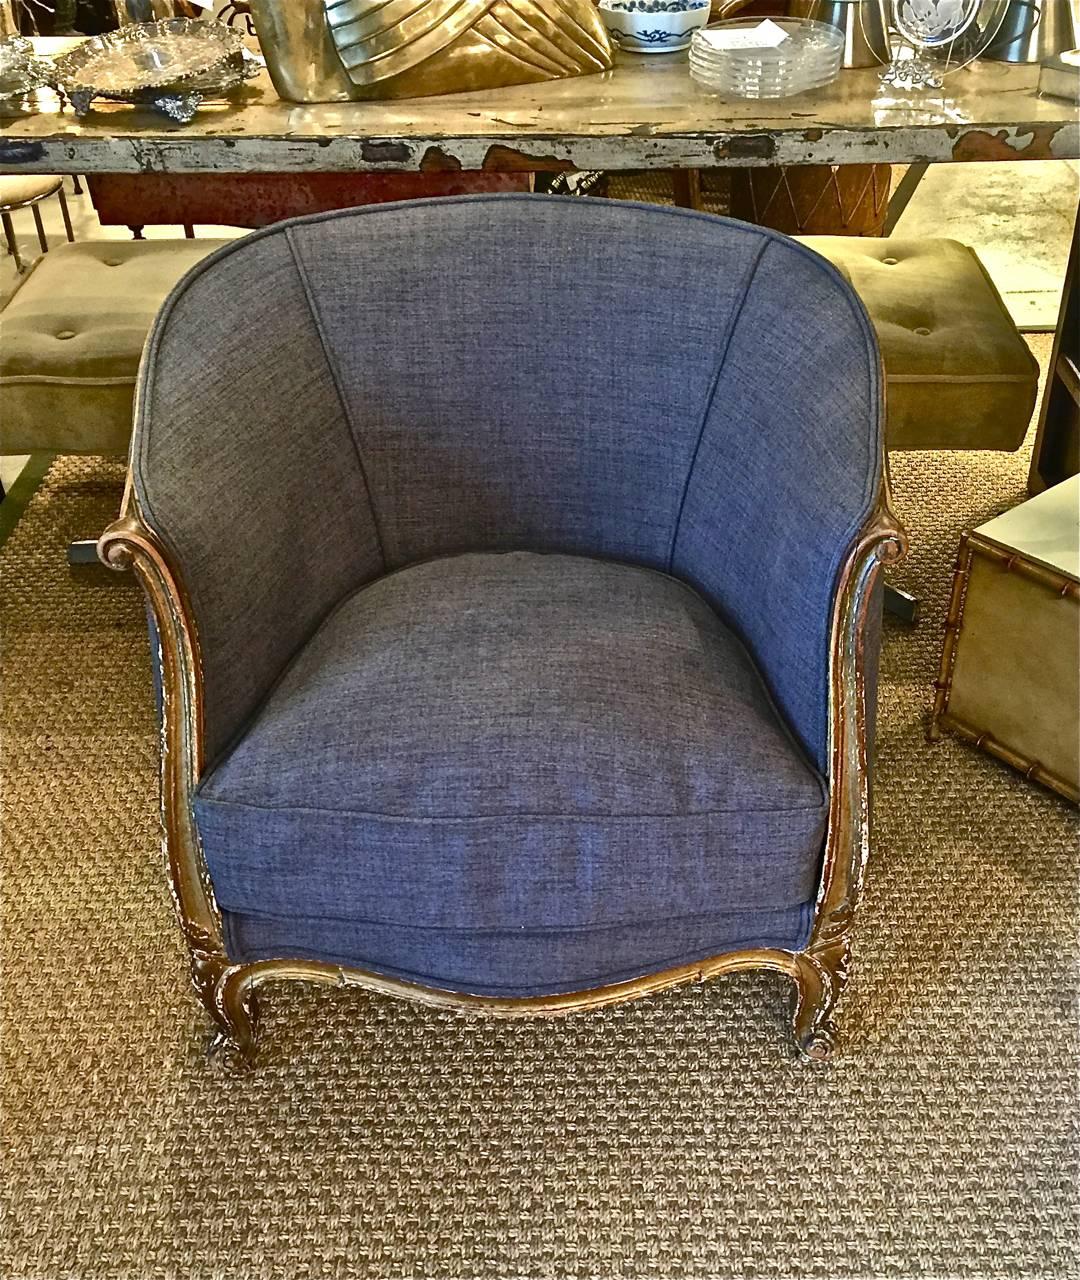 Pair of period French deco barrel-back bergeres or club chairs.
These deco chairs are in the Louis XV taste and feature a carved walnut frame that surrounds the back of the chairs. The Louis XV style of the chairs, together with the chippy/worm